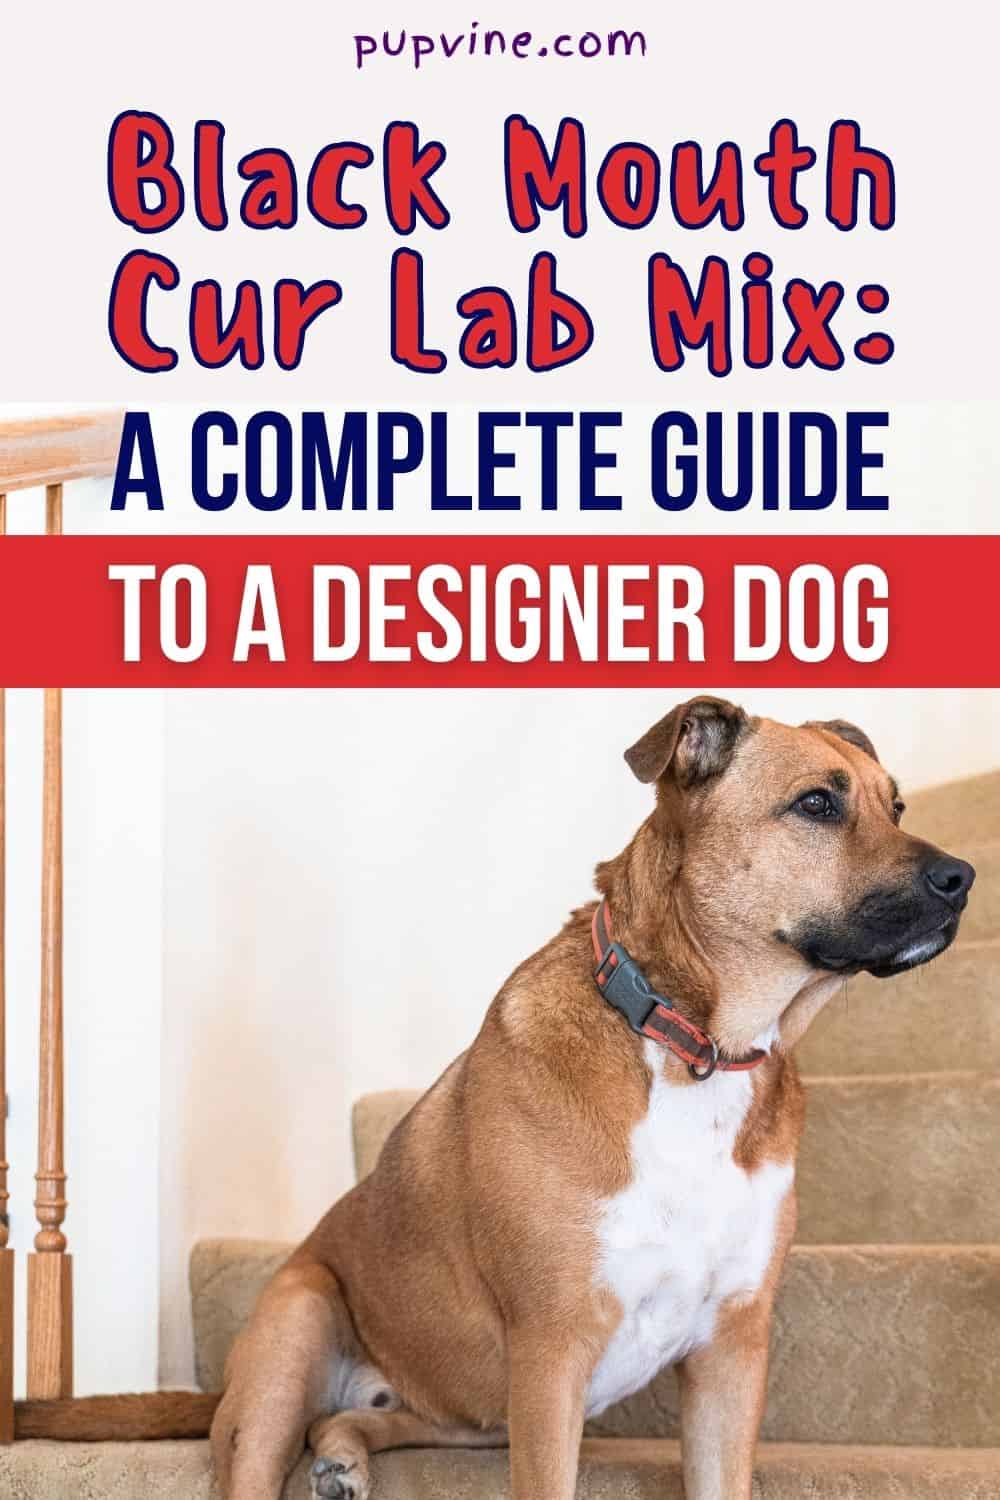 Black Mouth Cur Lab Mix: A Complete Guide To A Designer Dog